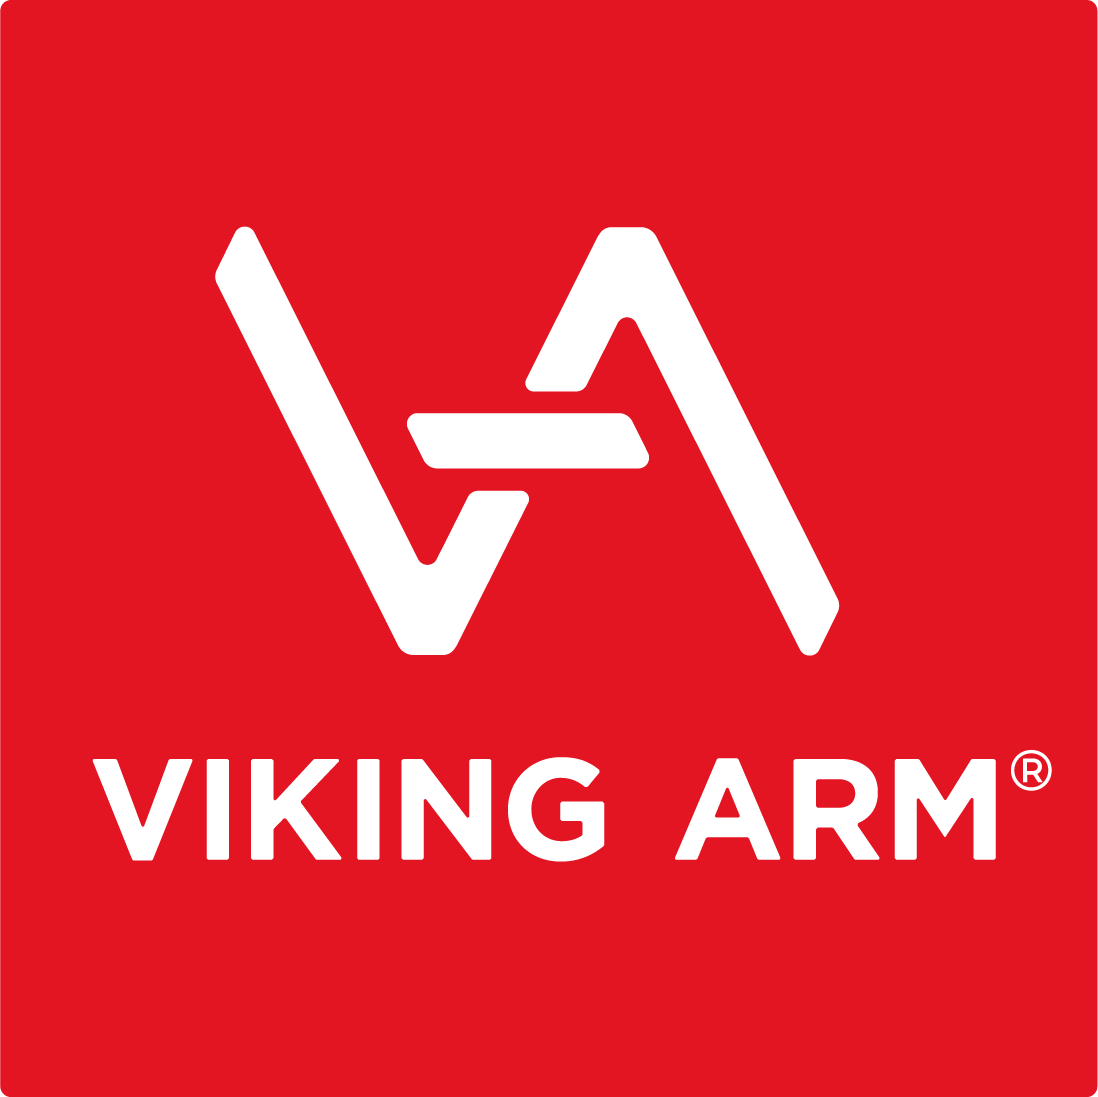 Viking Arm – Massca Products